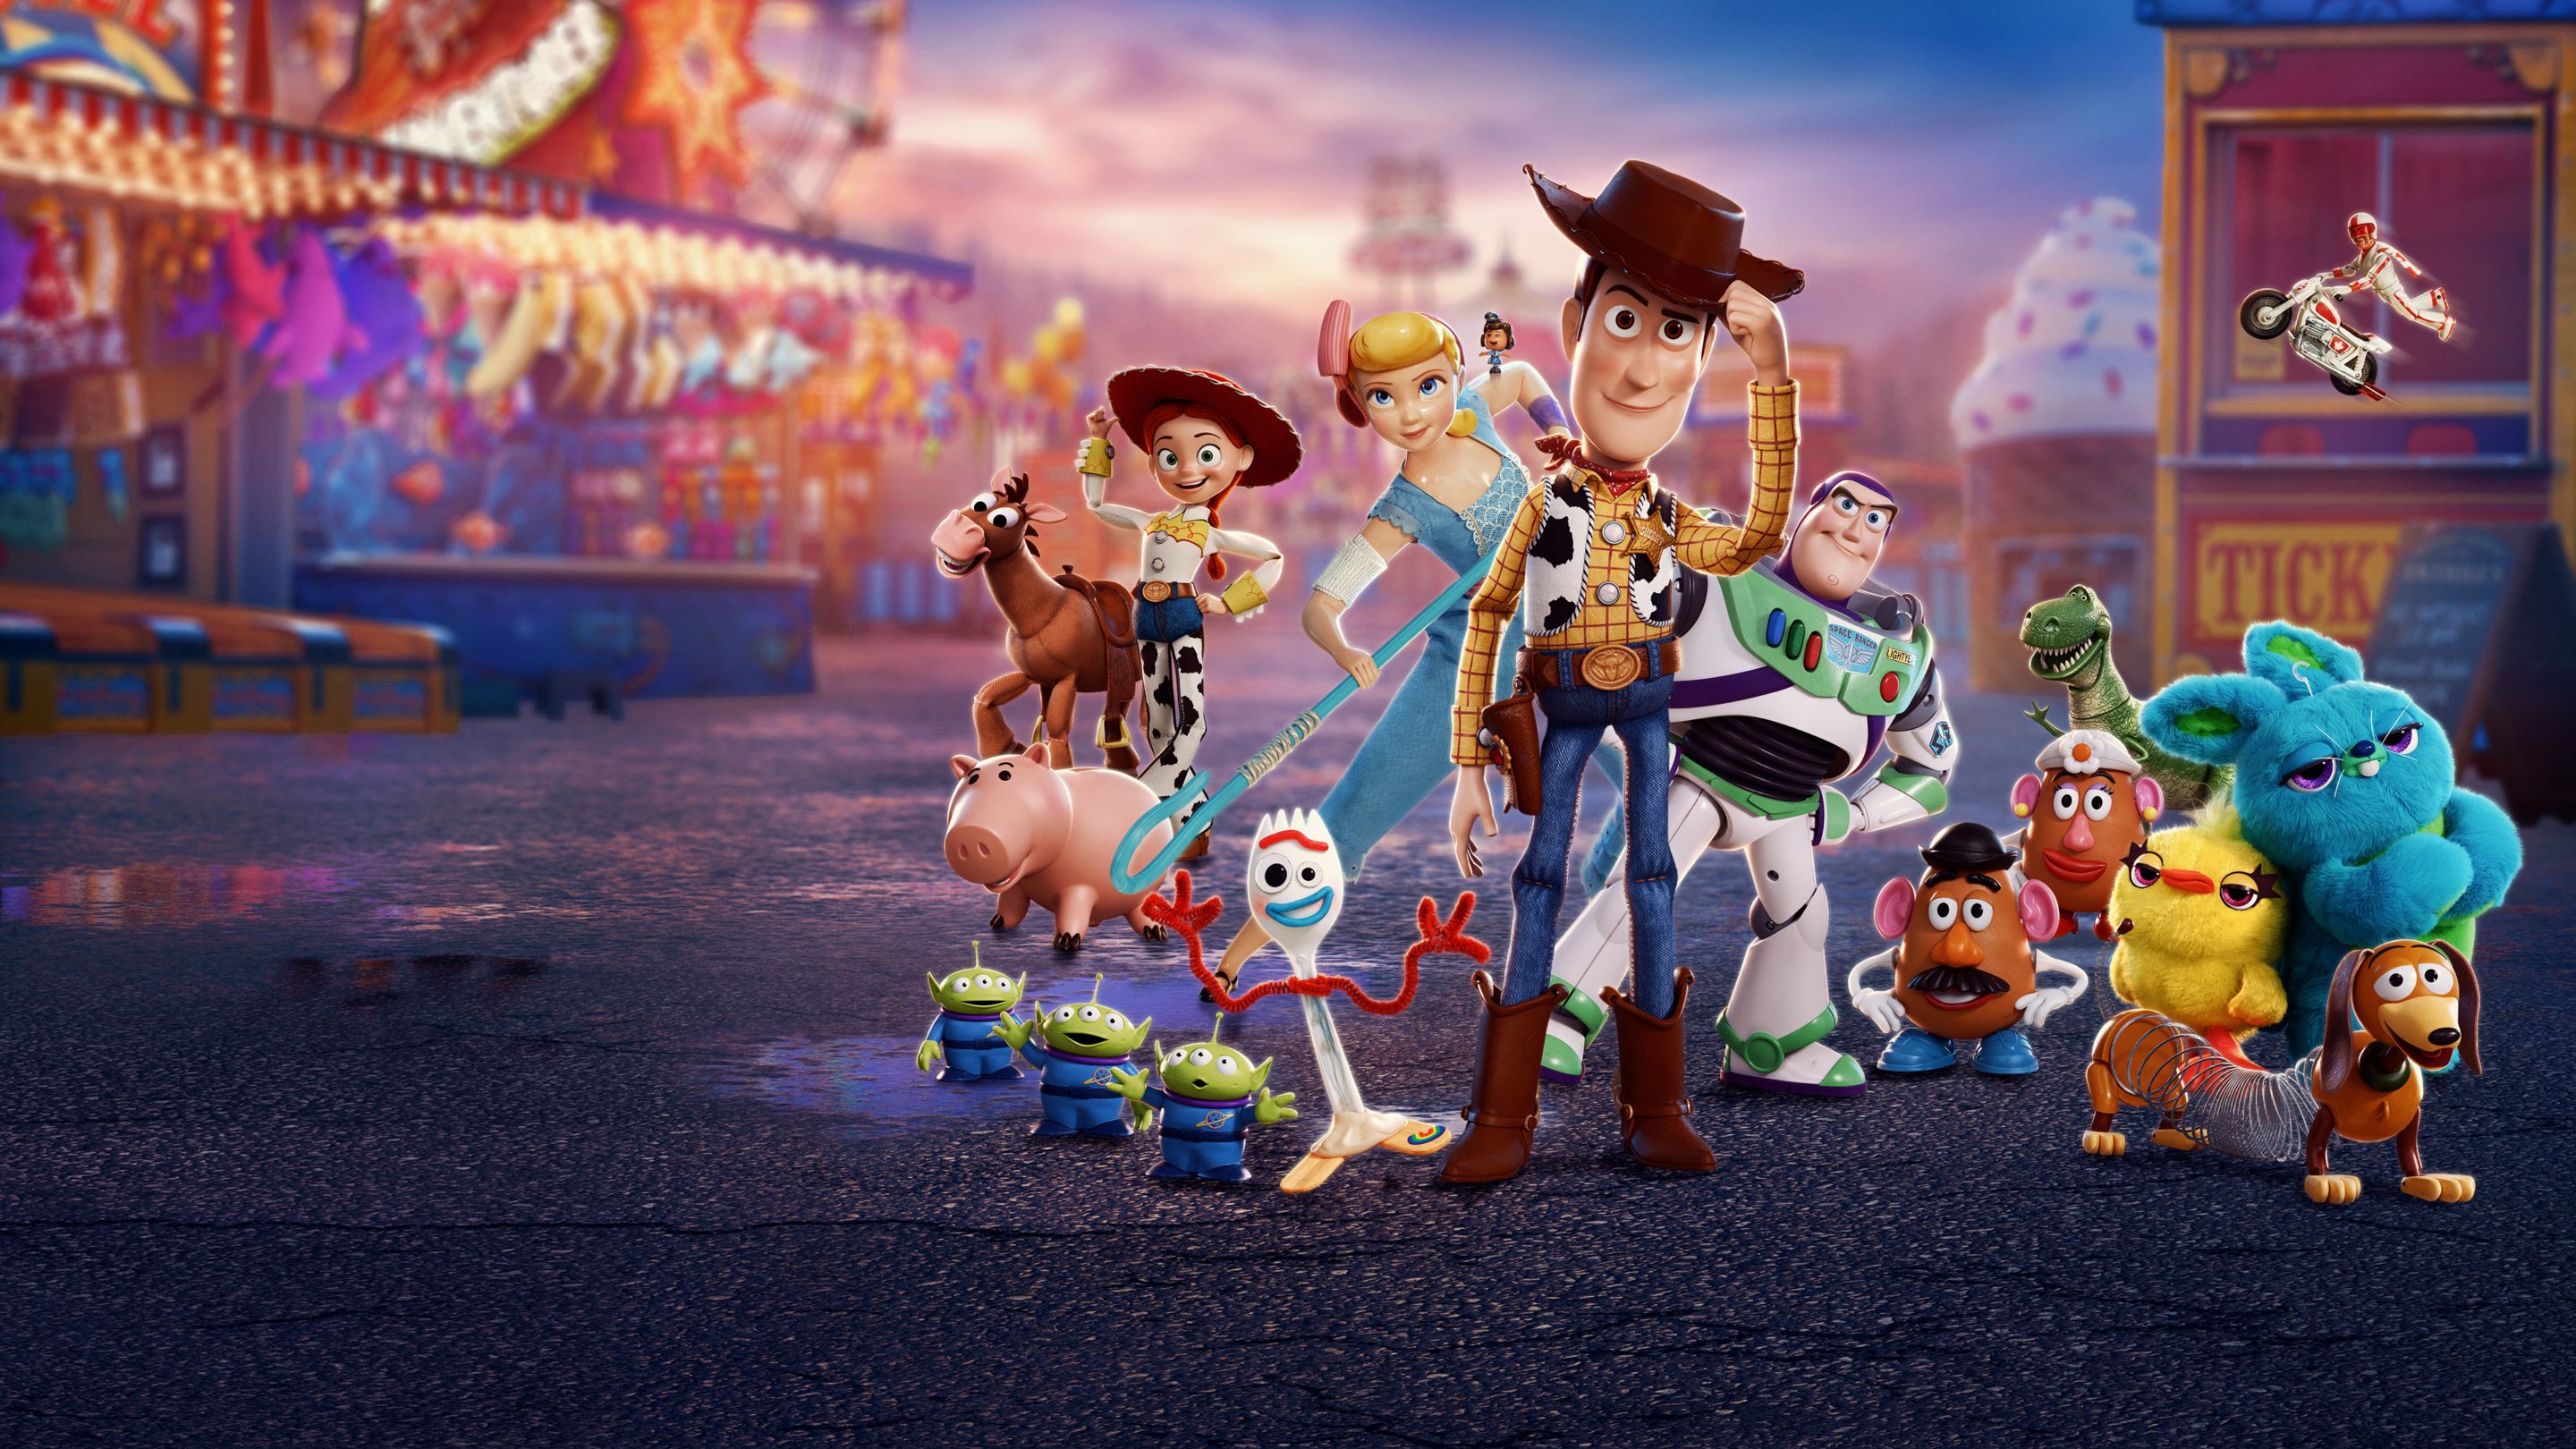 toy story 1 release date